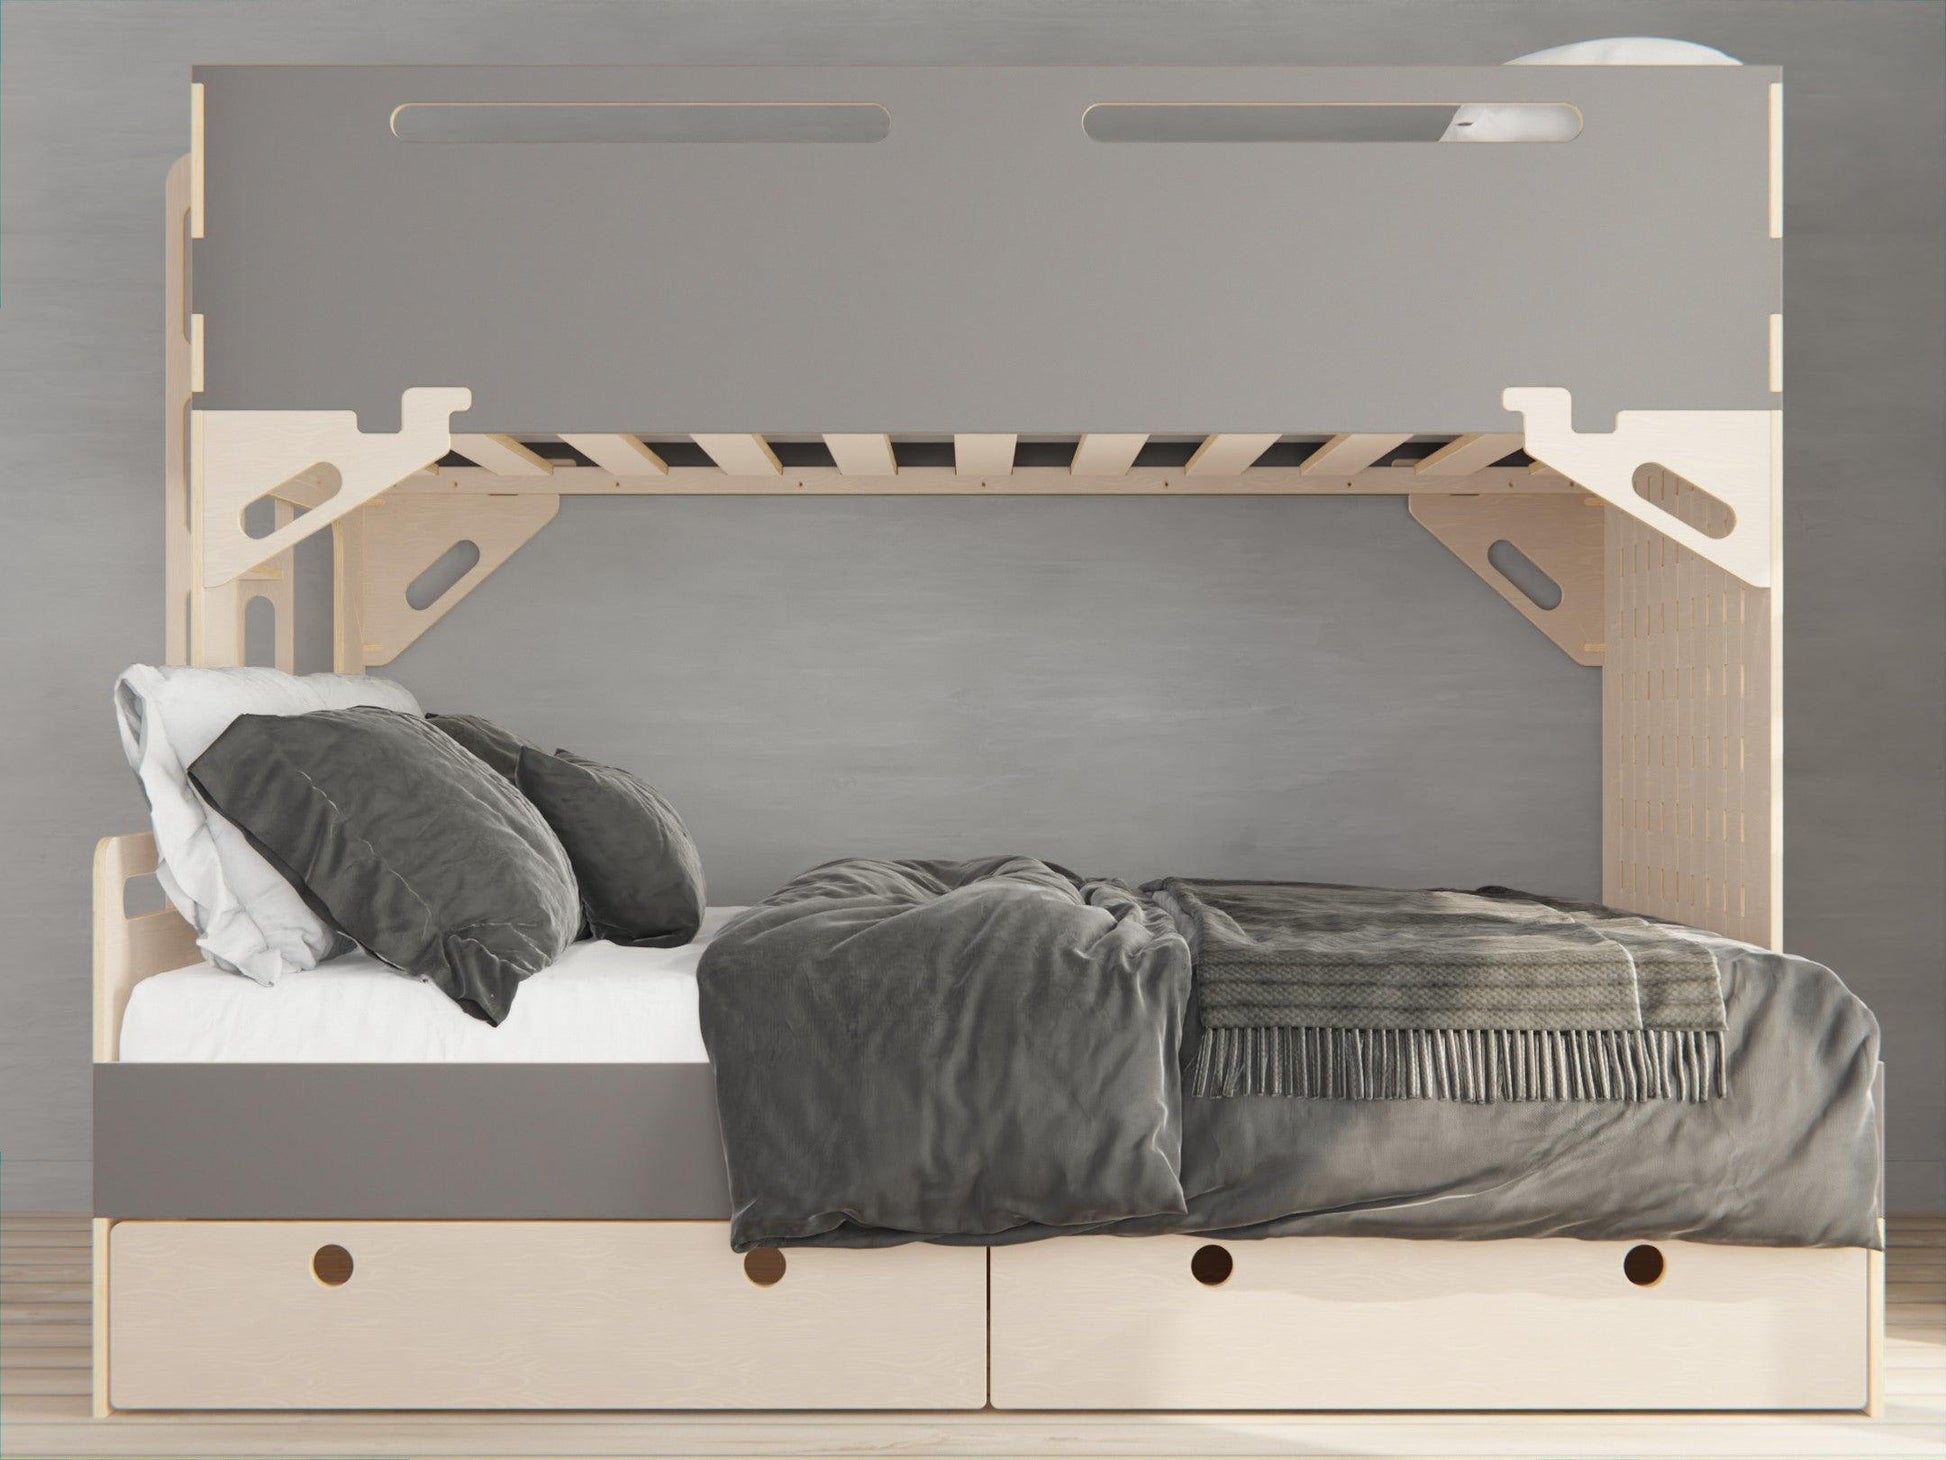 Upgrade your family living with our quality plywood bunk beds. Designed with storage drawers for optimal organisation.